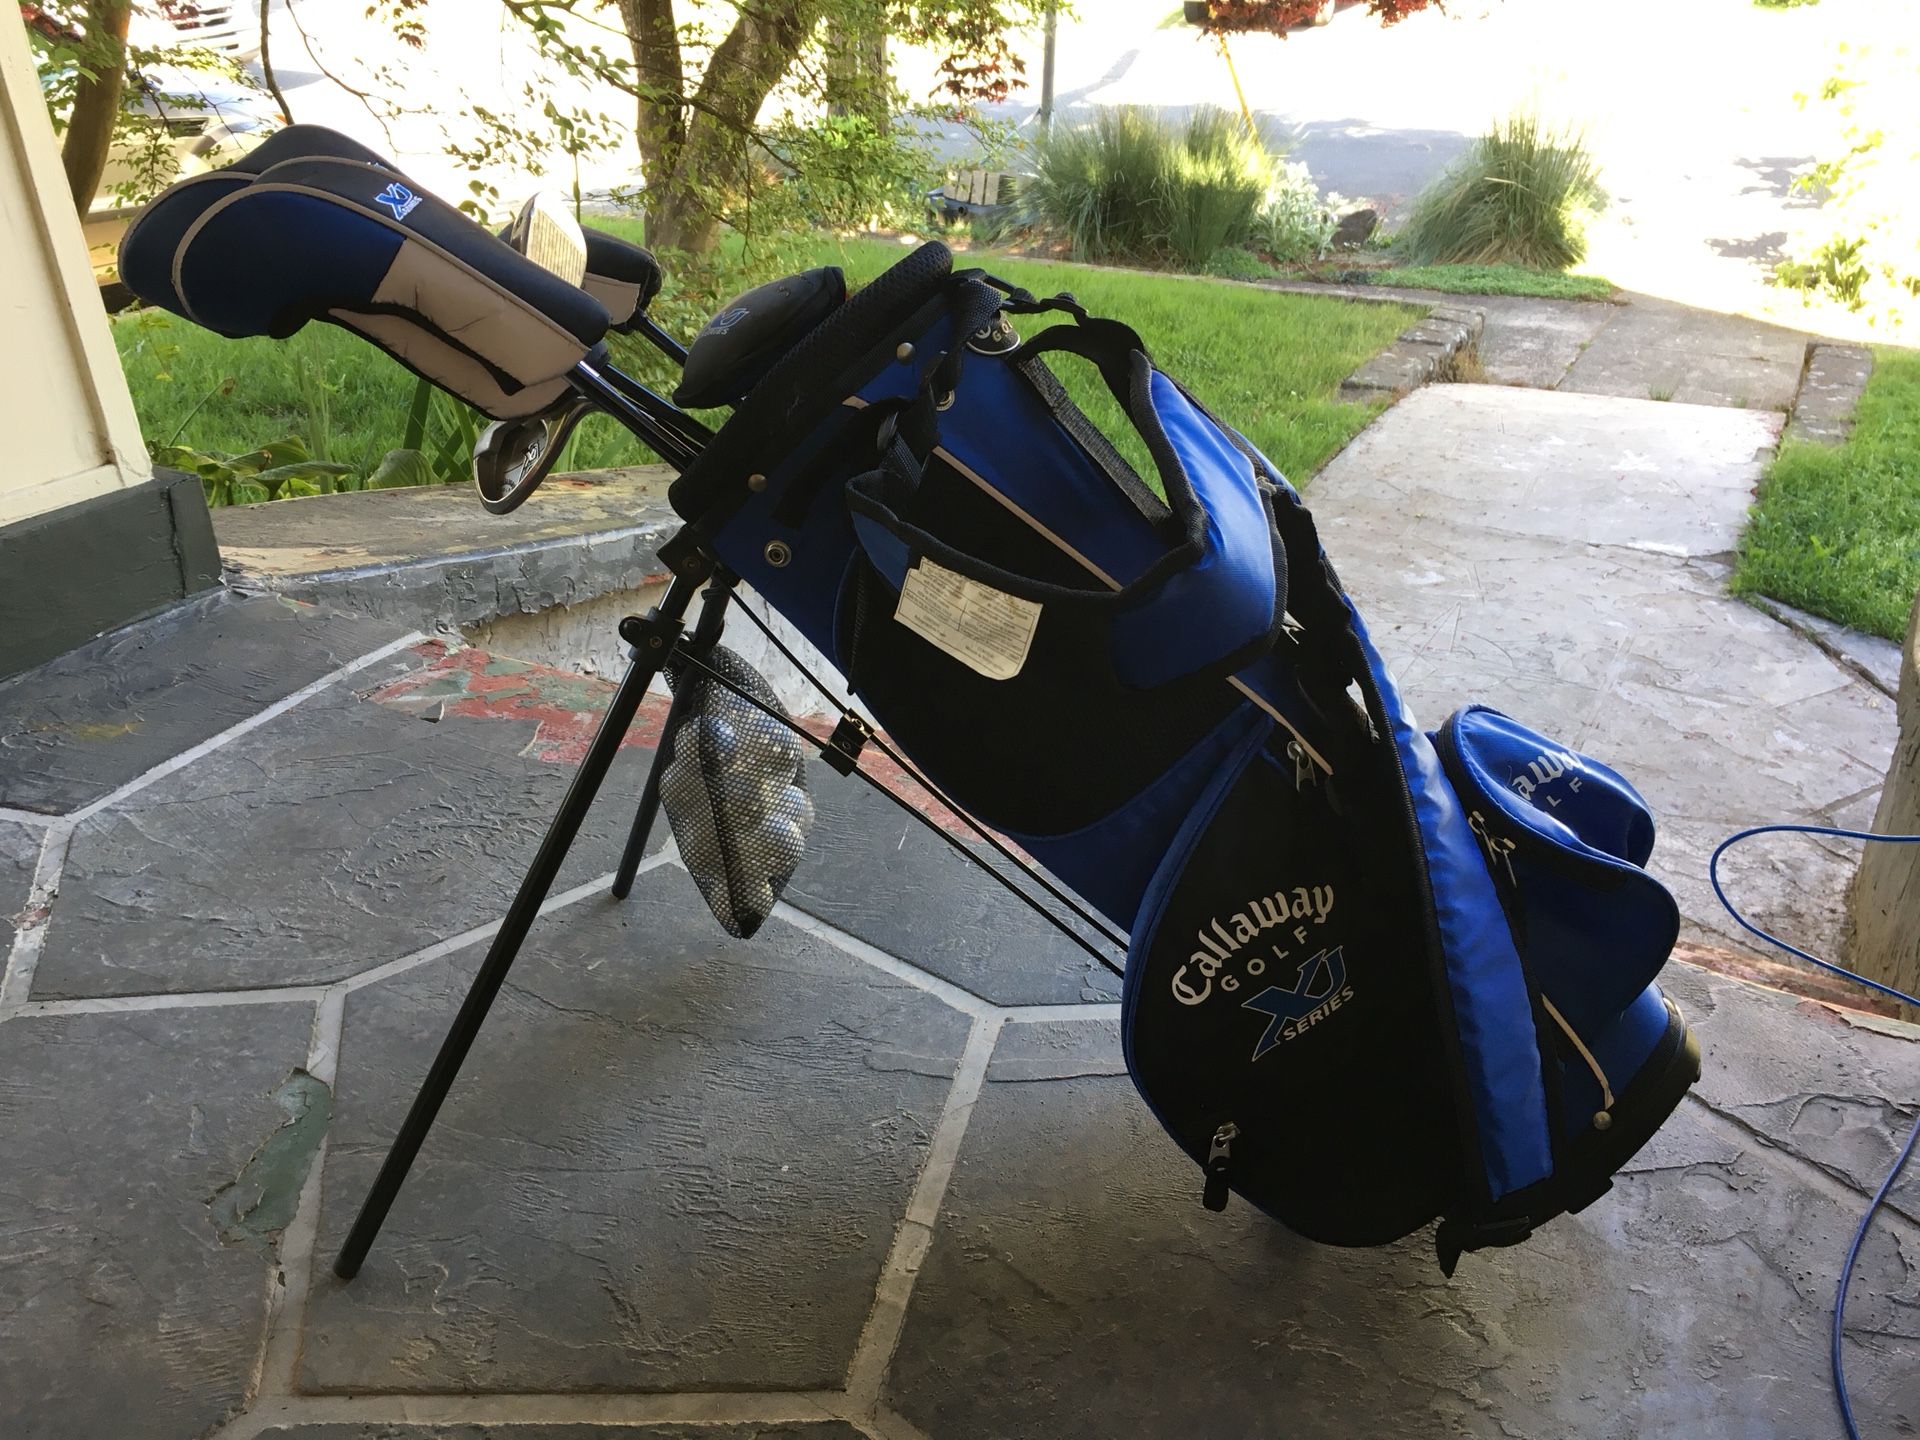 Callaway junior golf clubs with bag. Right handed.